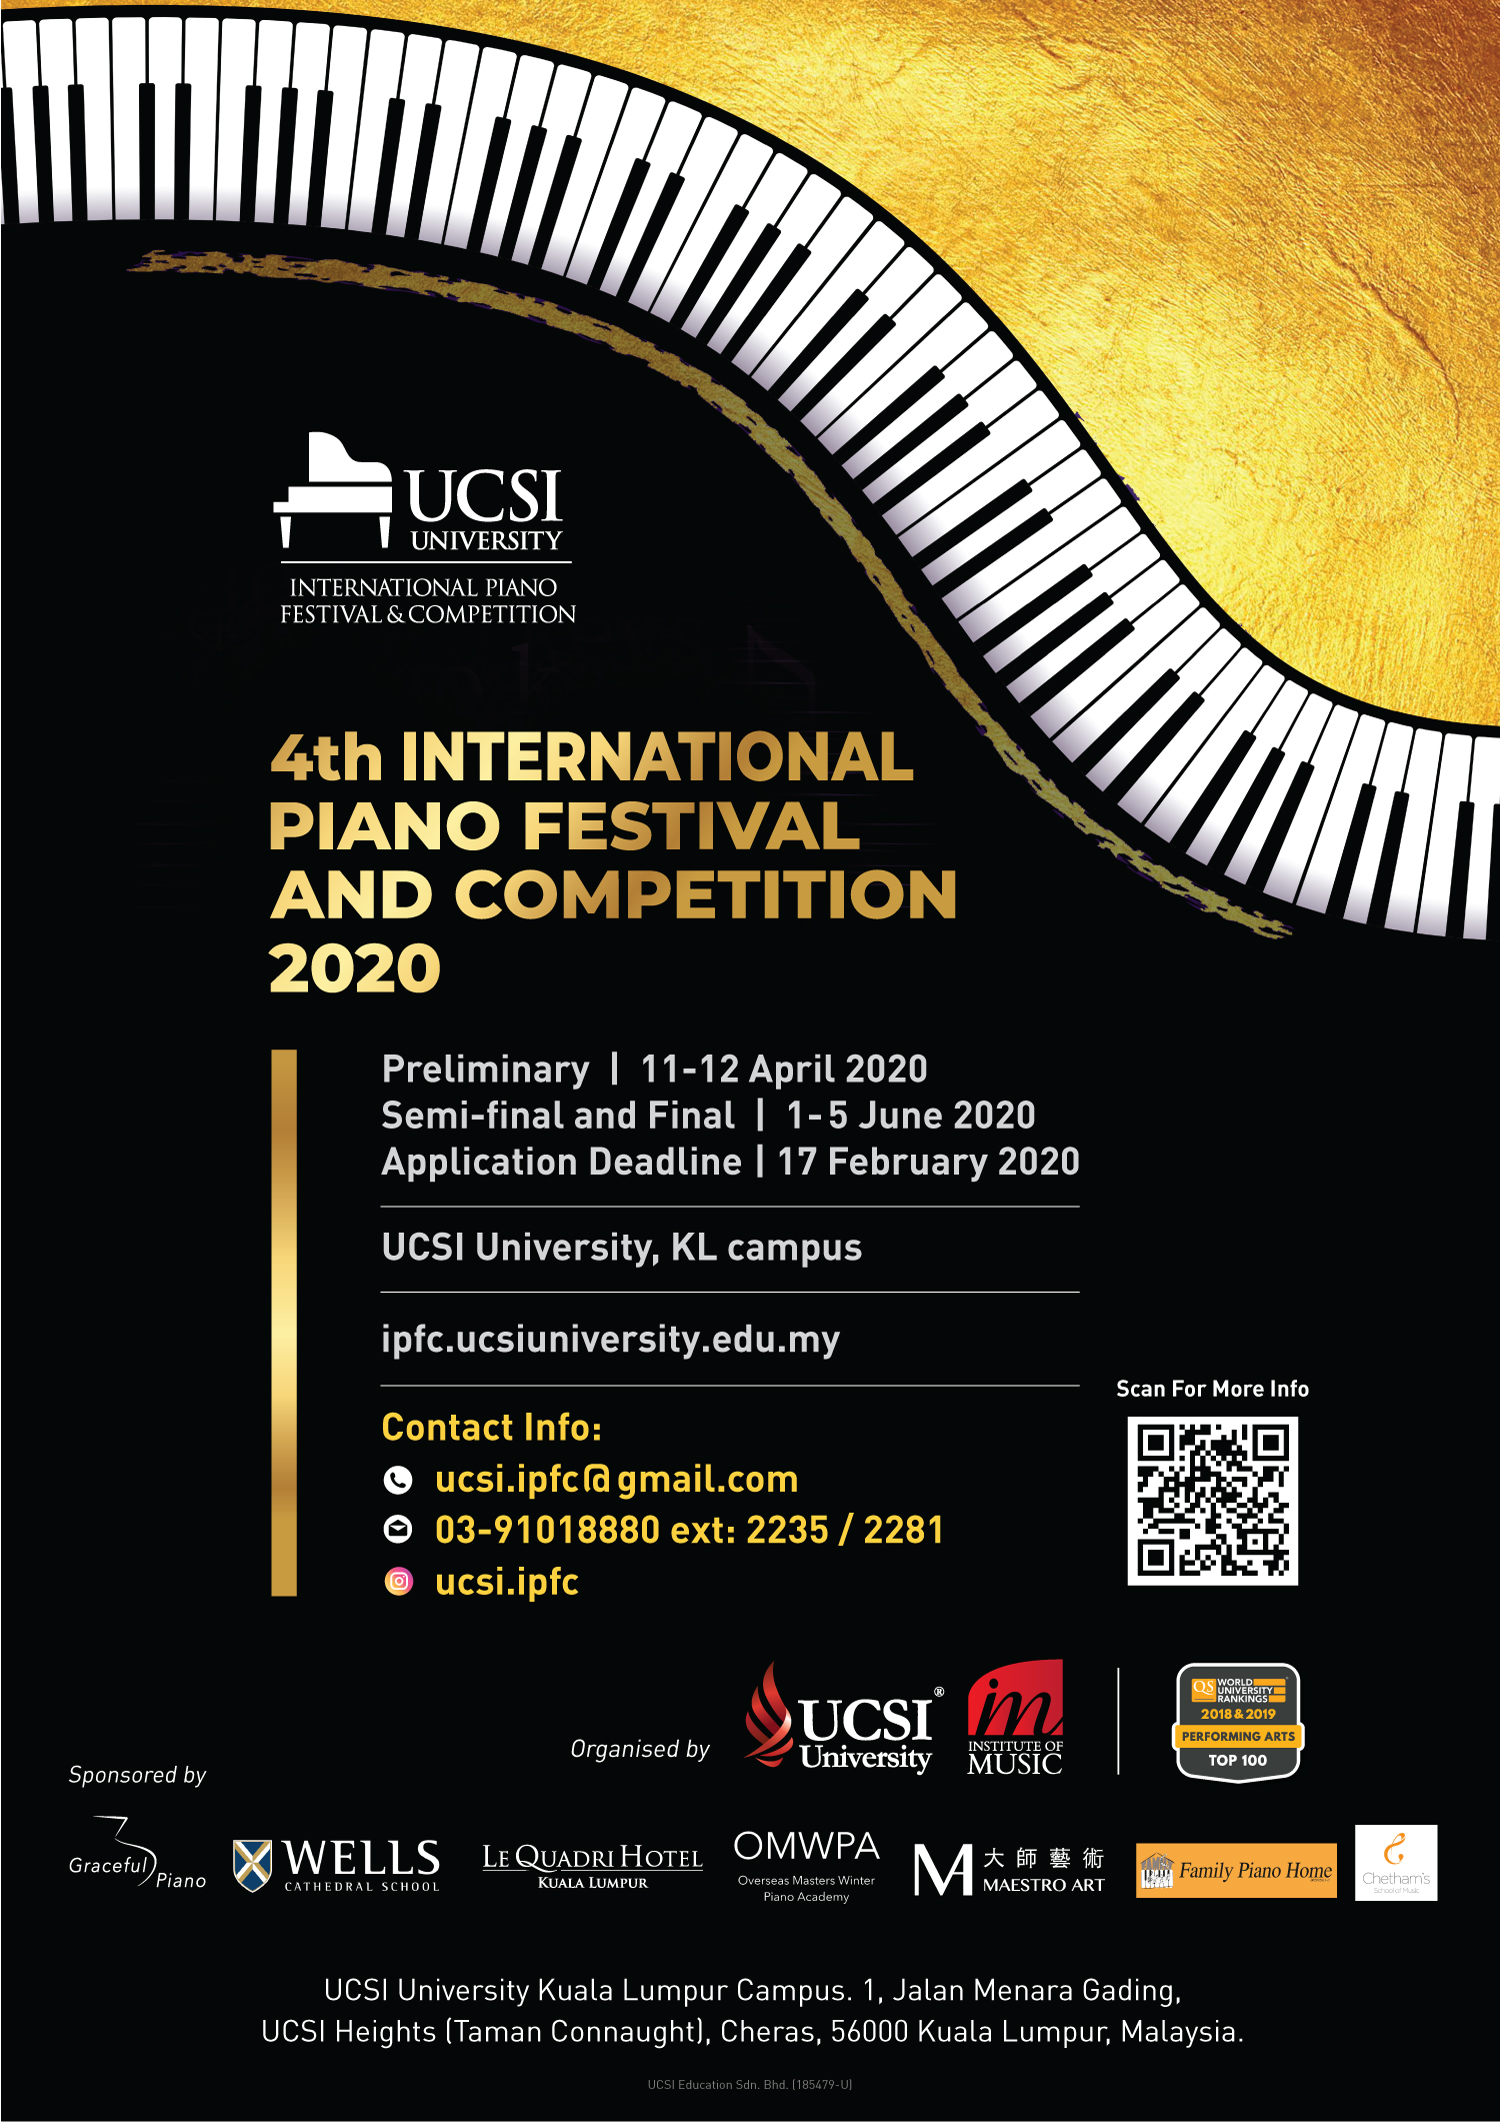 4th International Piano Festival and Competition 2020